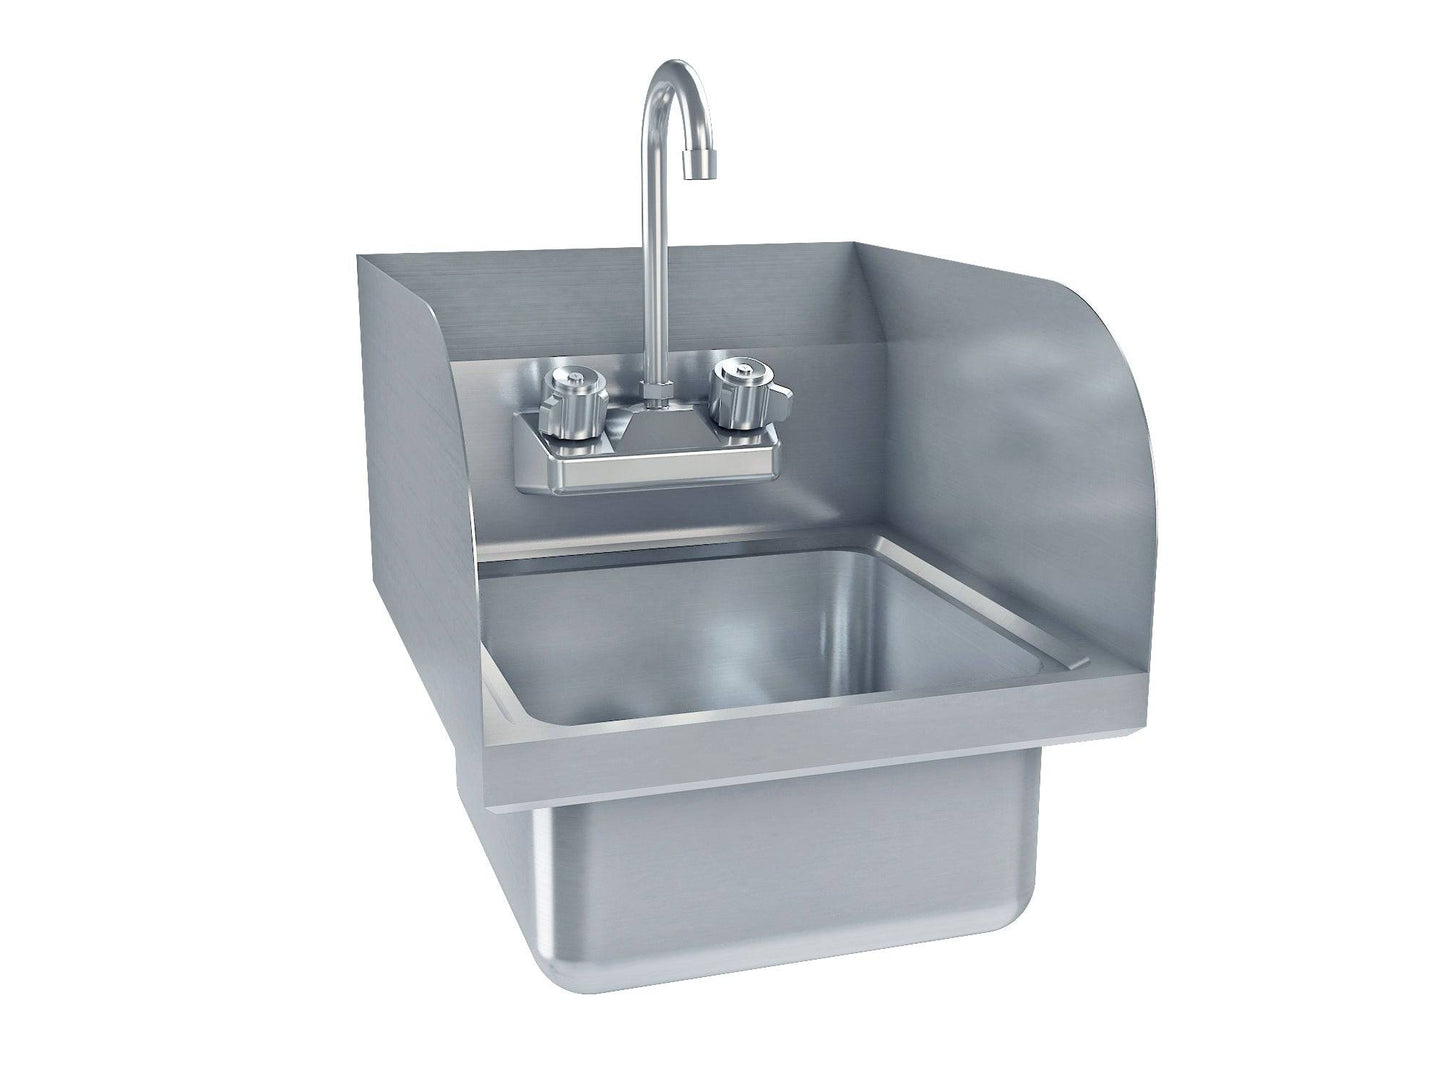 Hand Sink Wall Mount with Side Panels - 11"x13" - Tarrison